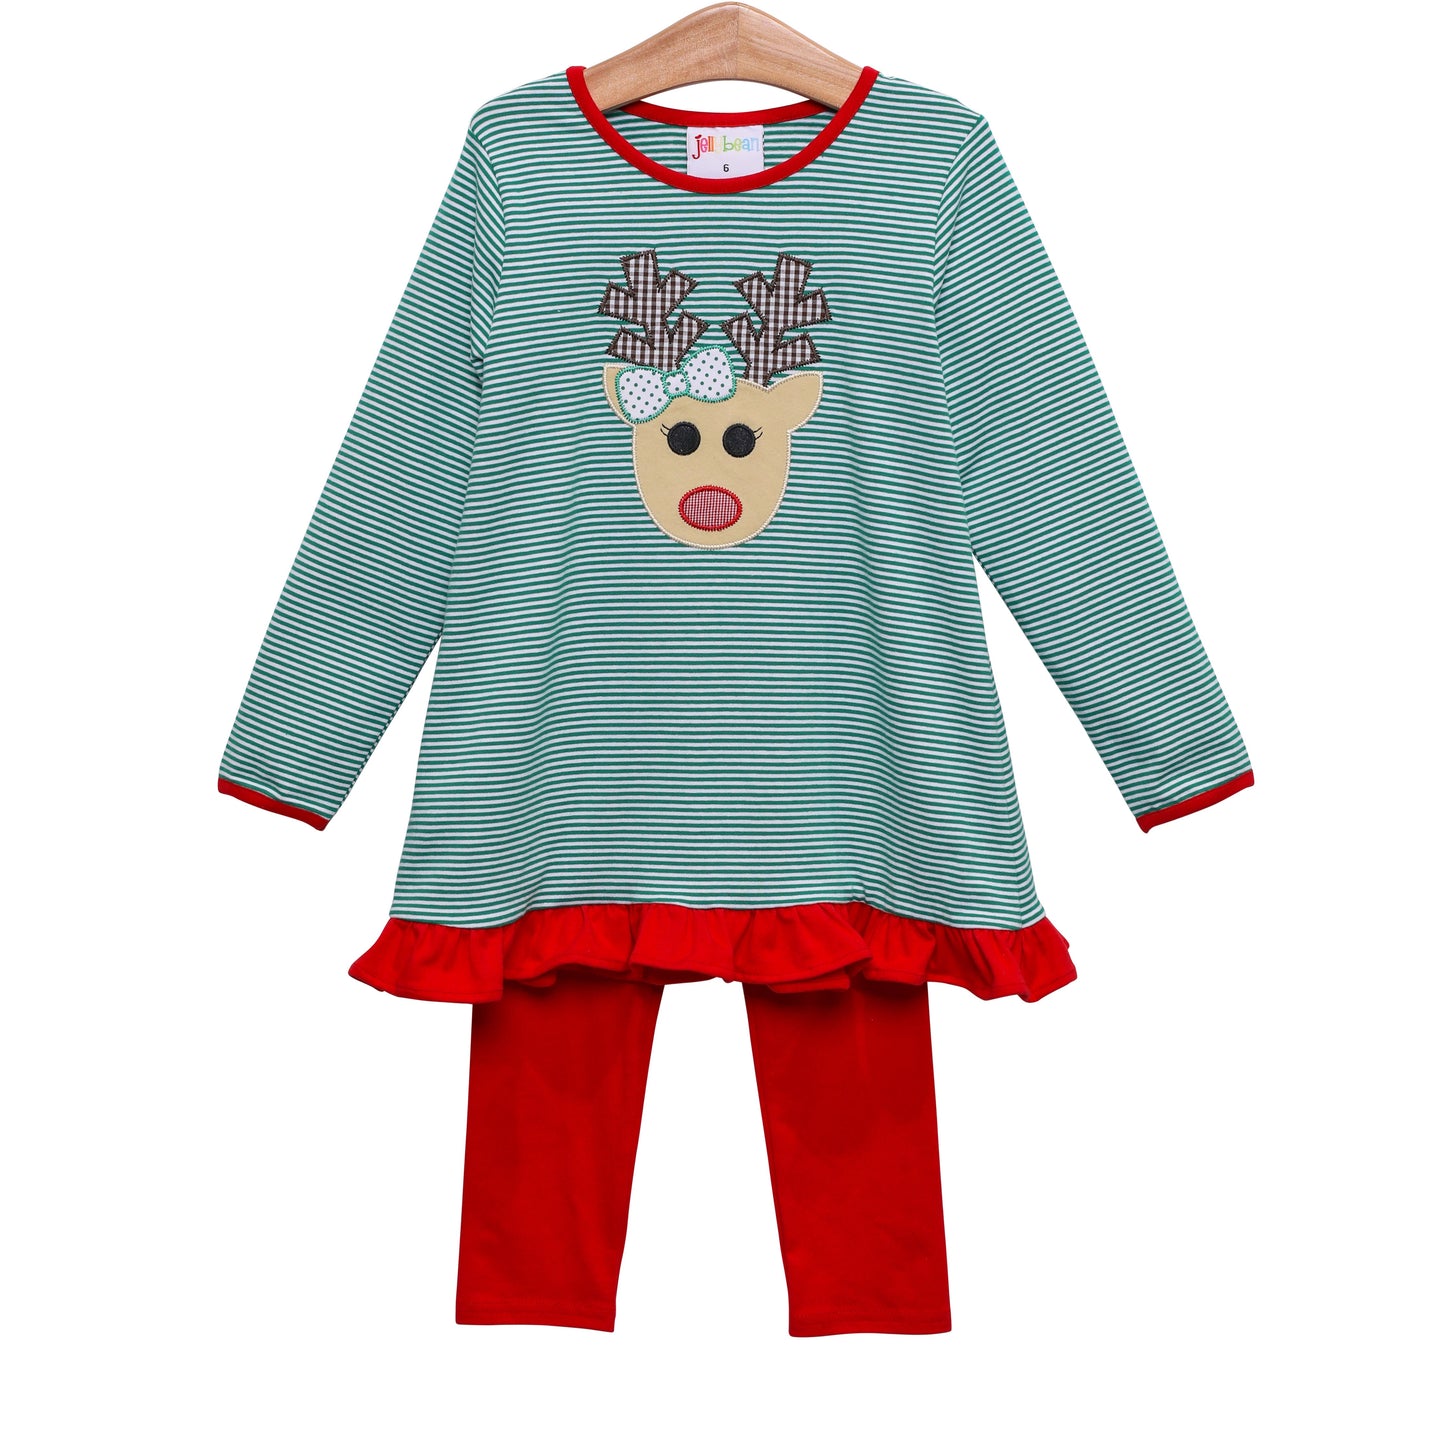 Ruby Reindeer Ruffle Pants Set Jellybean by Smock Candy